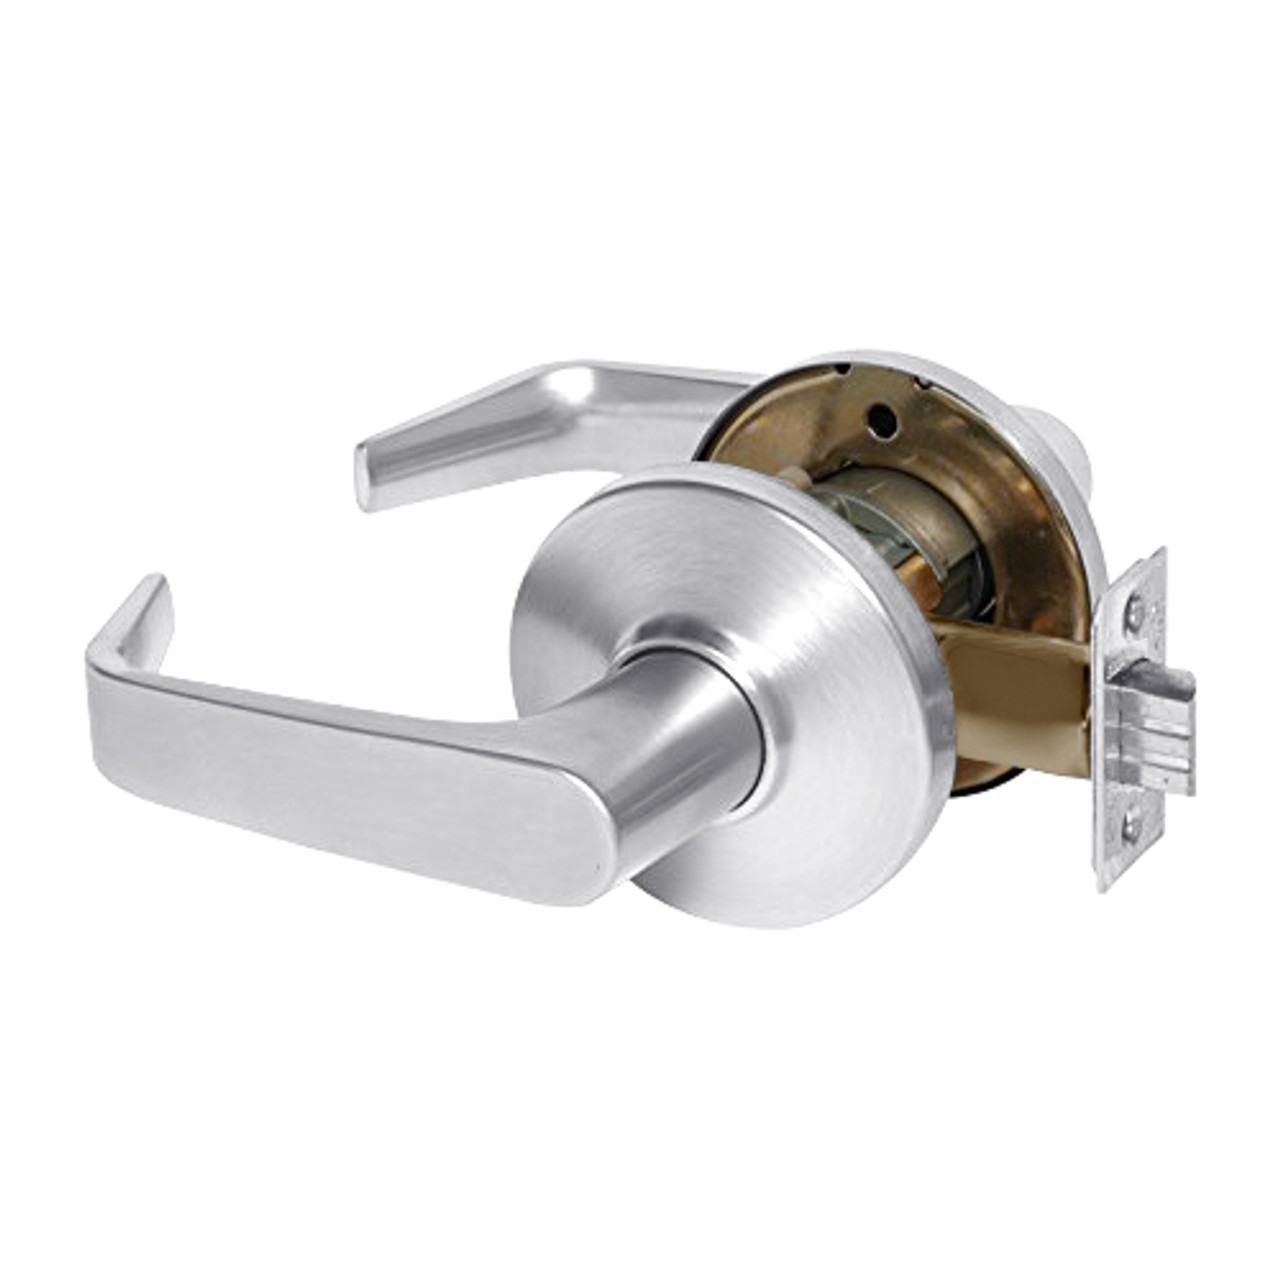 9K30N15DS3625 Best 9K Series Passage Heavy Duty Cylindrical Lever Locks with Contour Angle with Return Lever Design in Bright Chrome